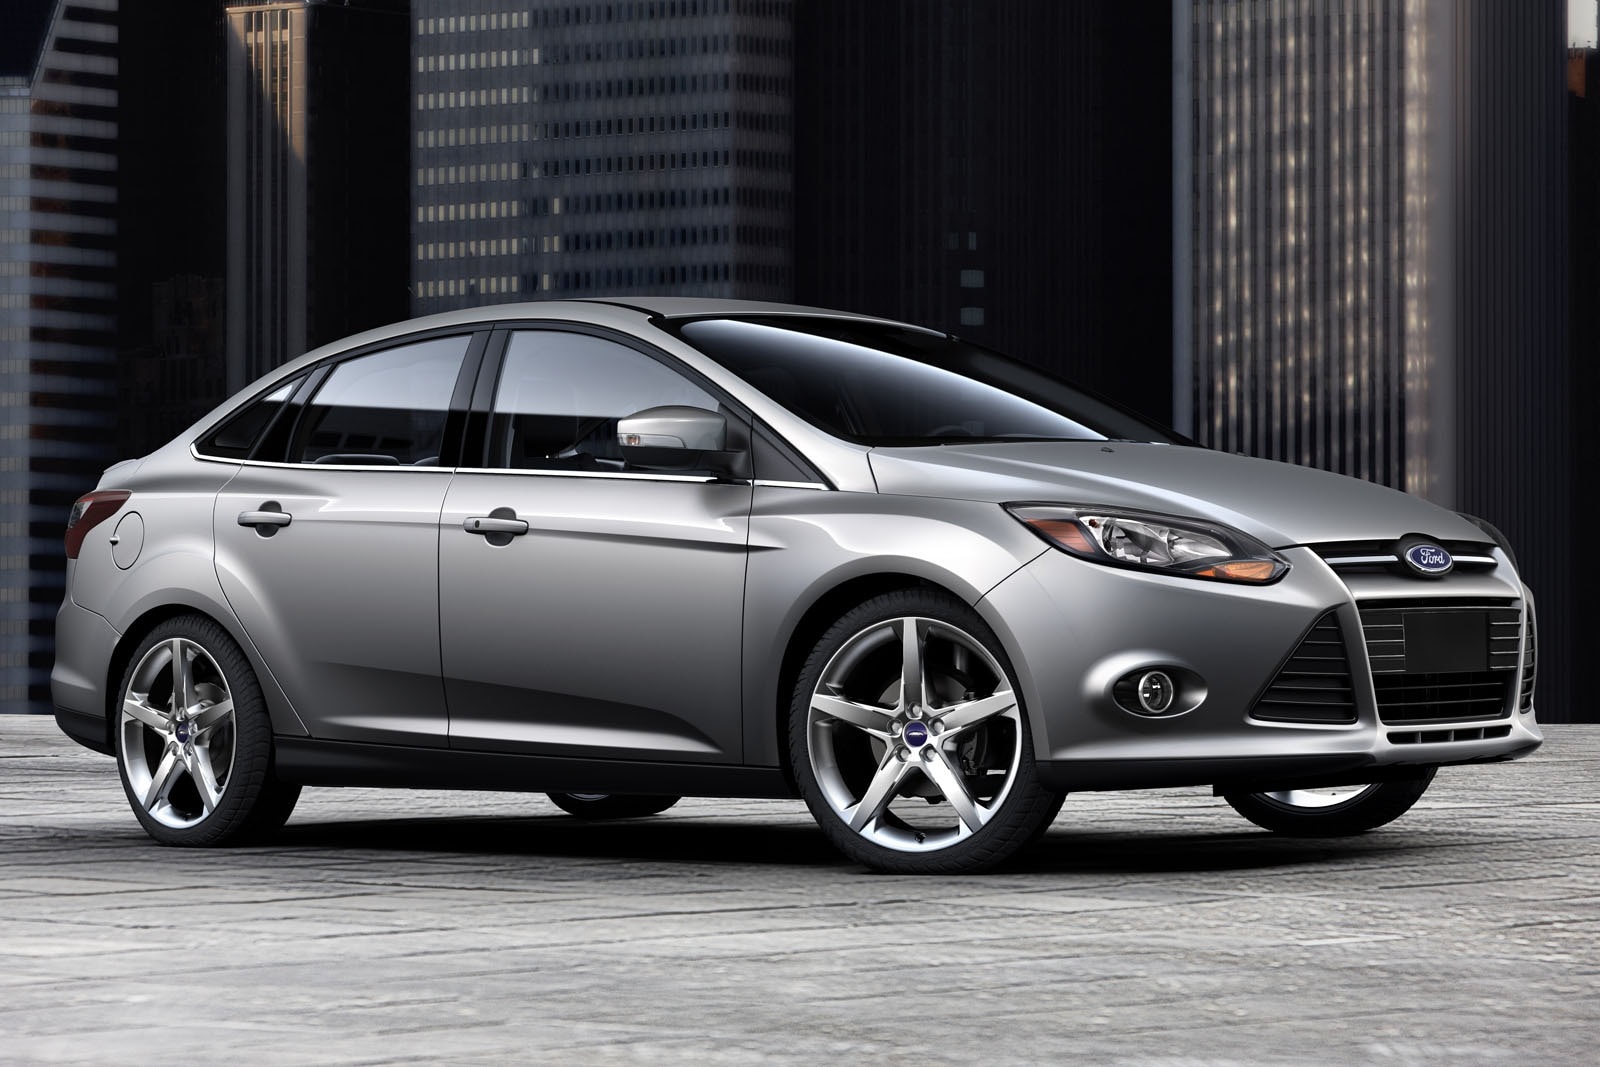 2013 Ford Focus Review & Ratings | Edmunds